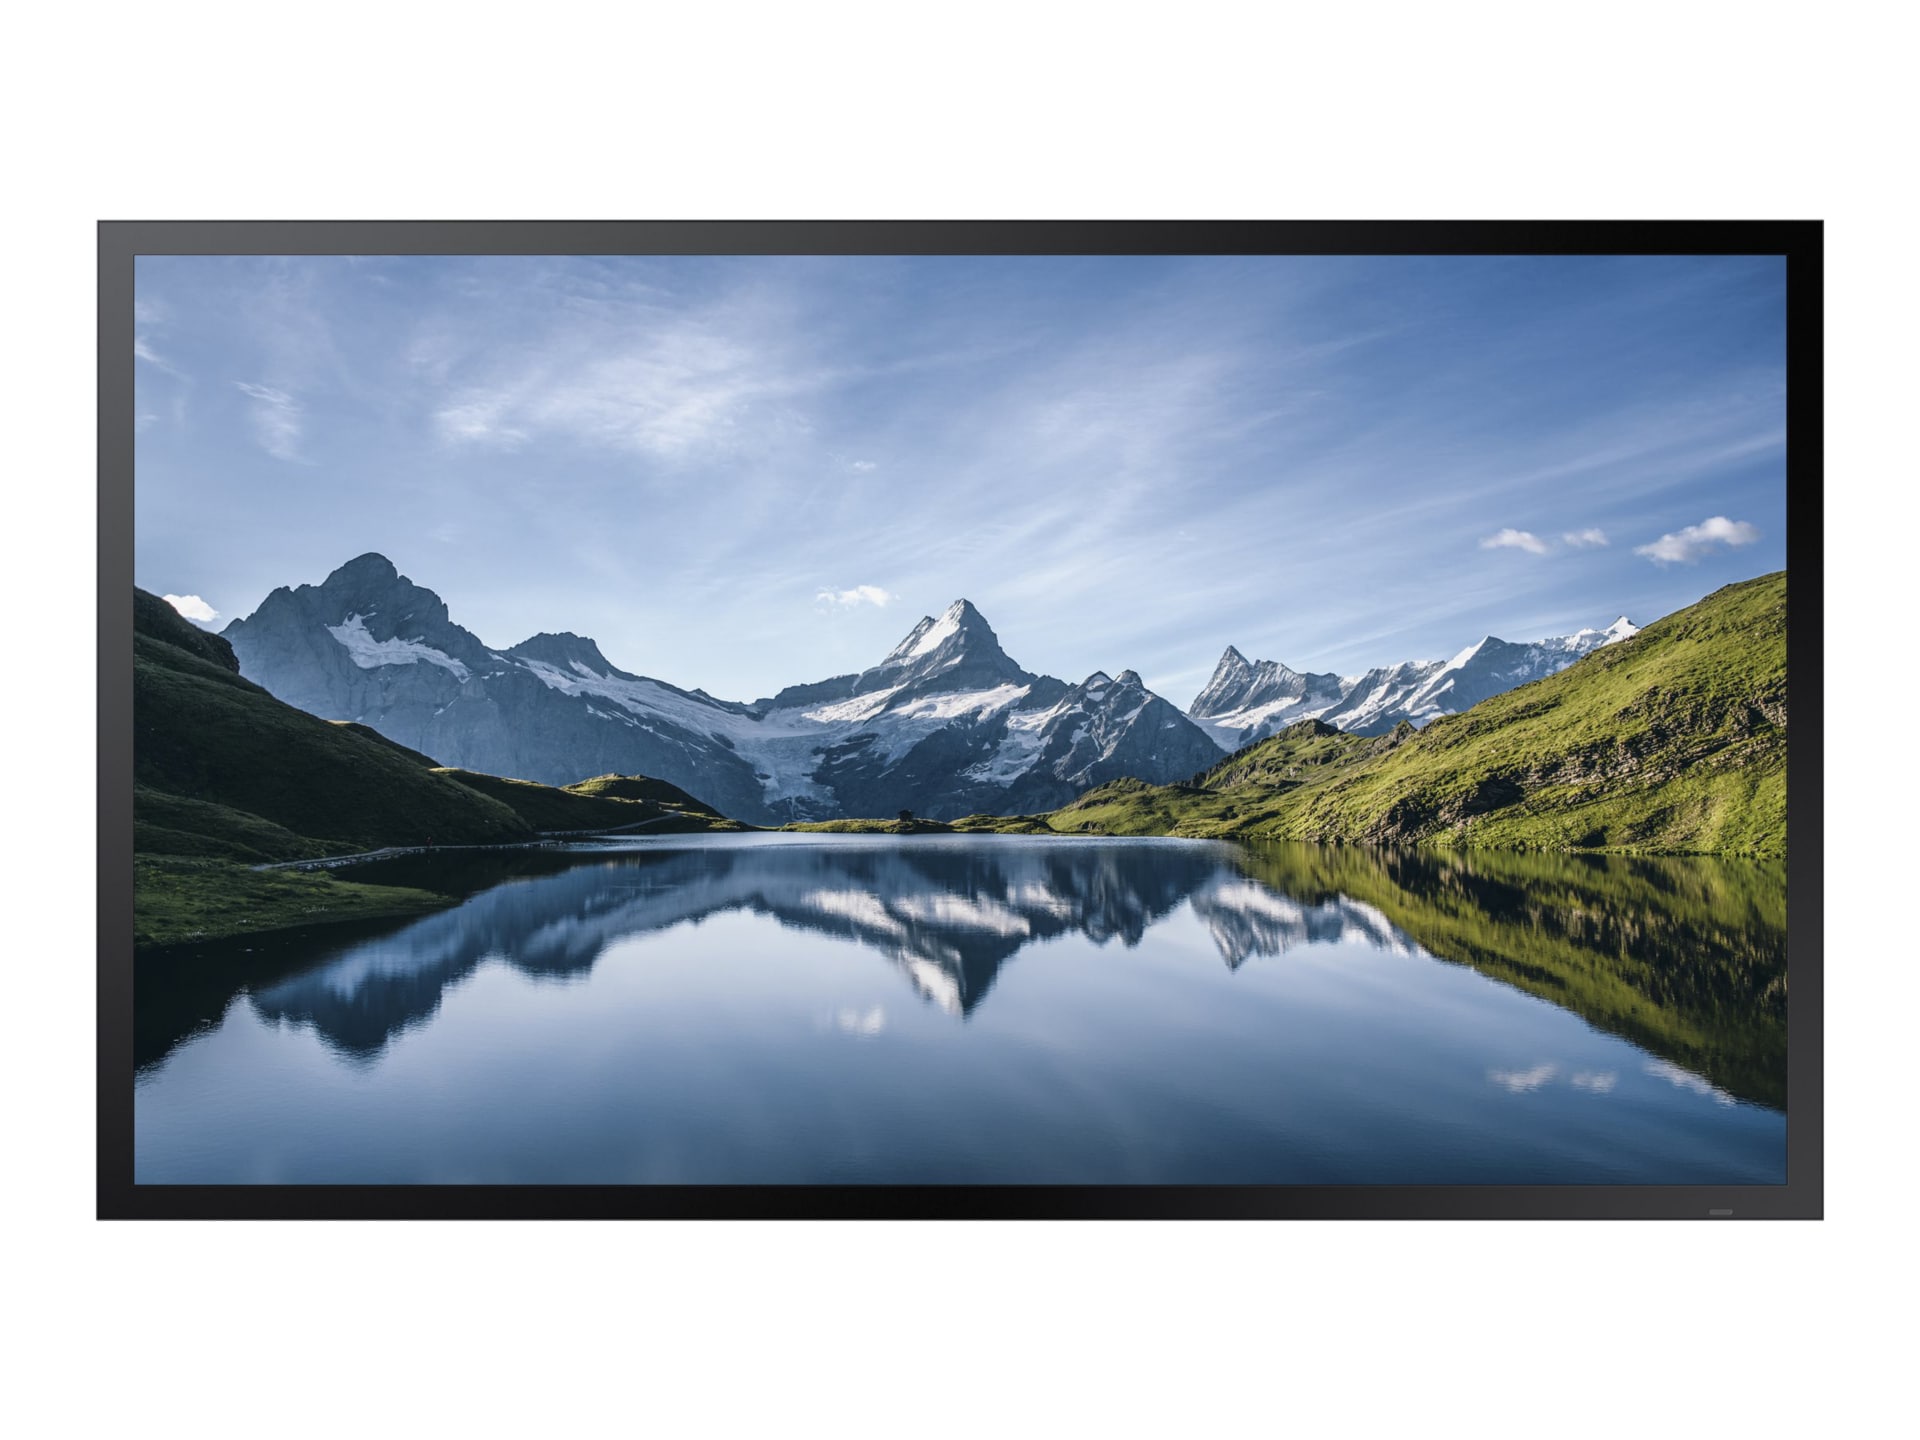 Samsung OH46B-S OHB-S Series - 46" Class (45.9" viewable) LED-backlit LCD d